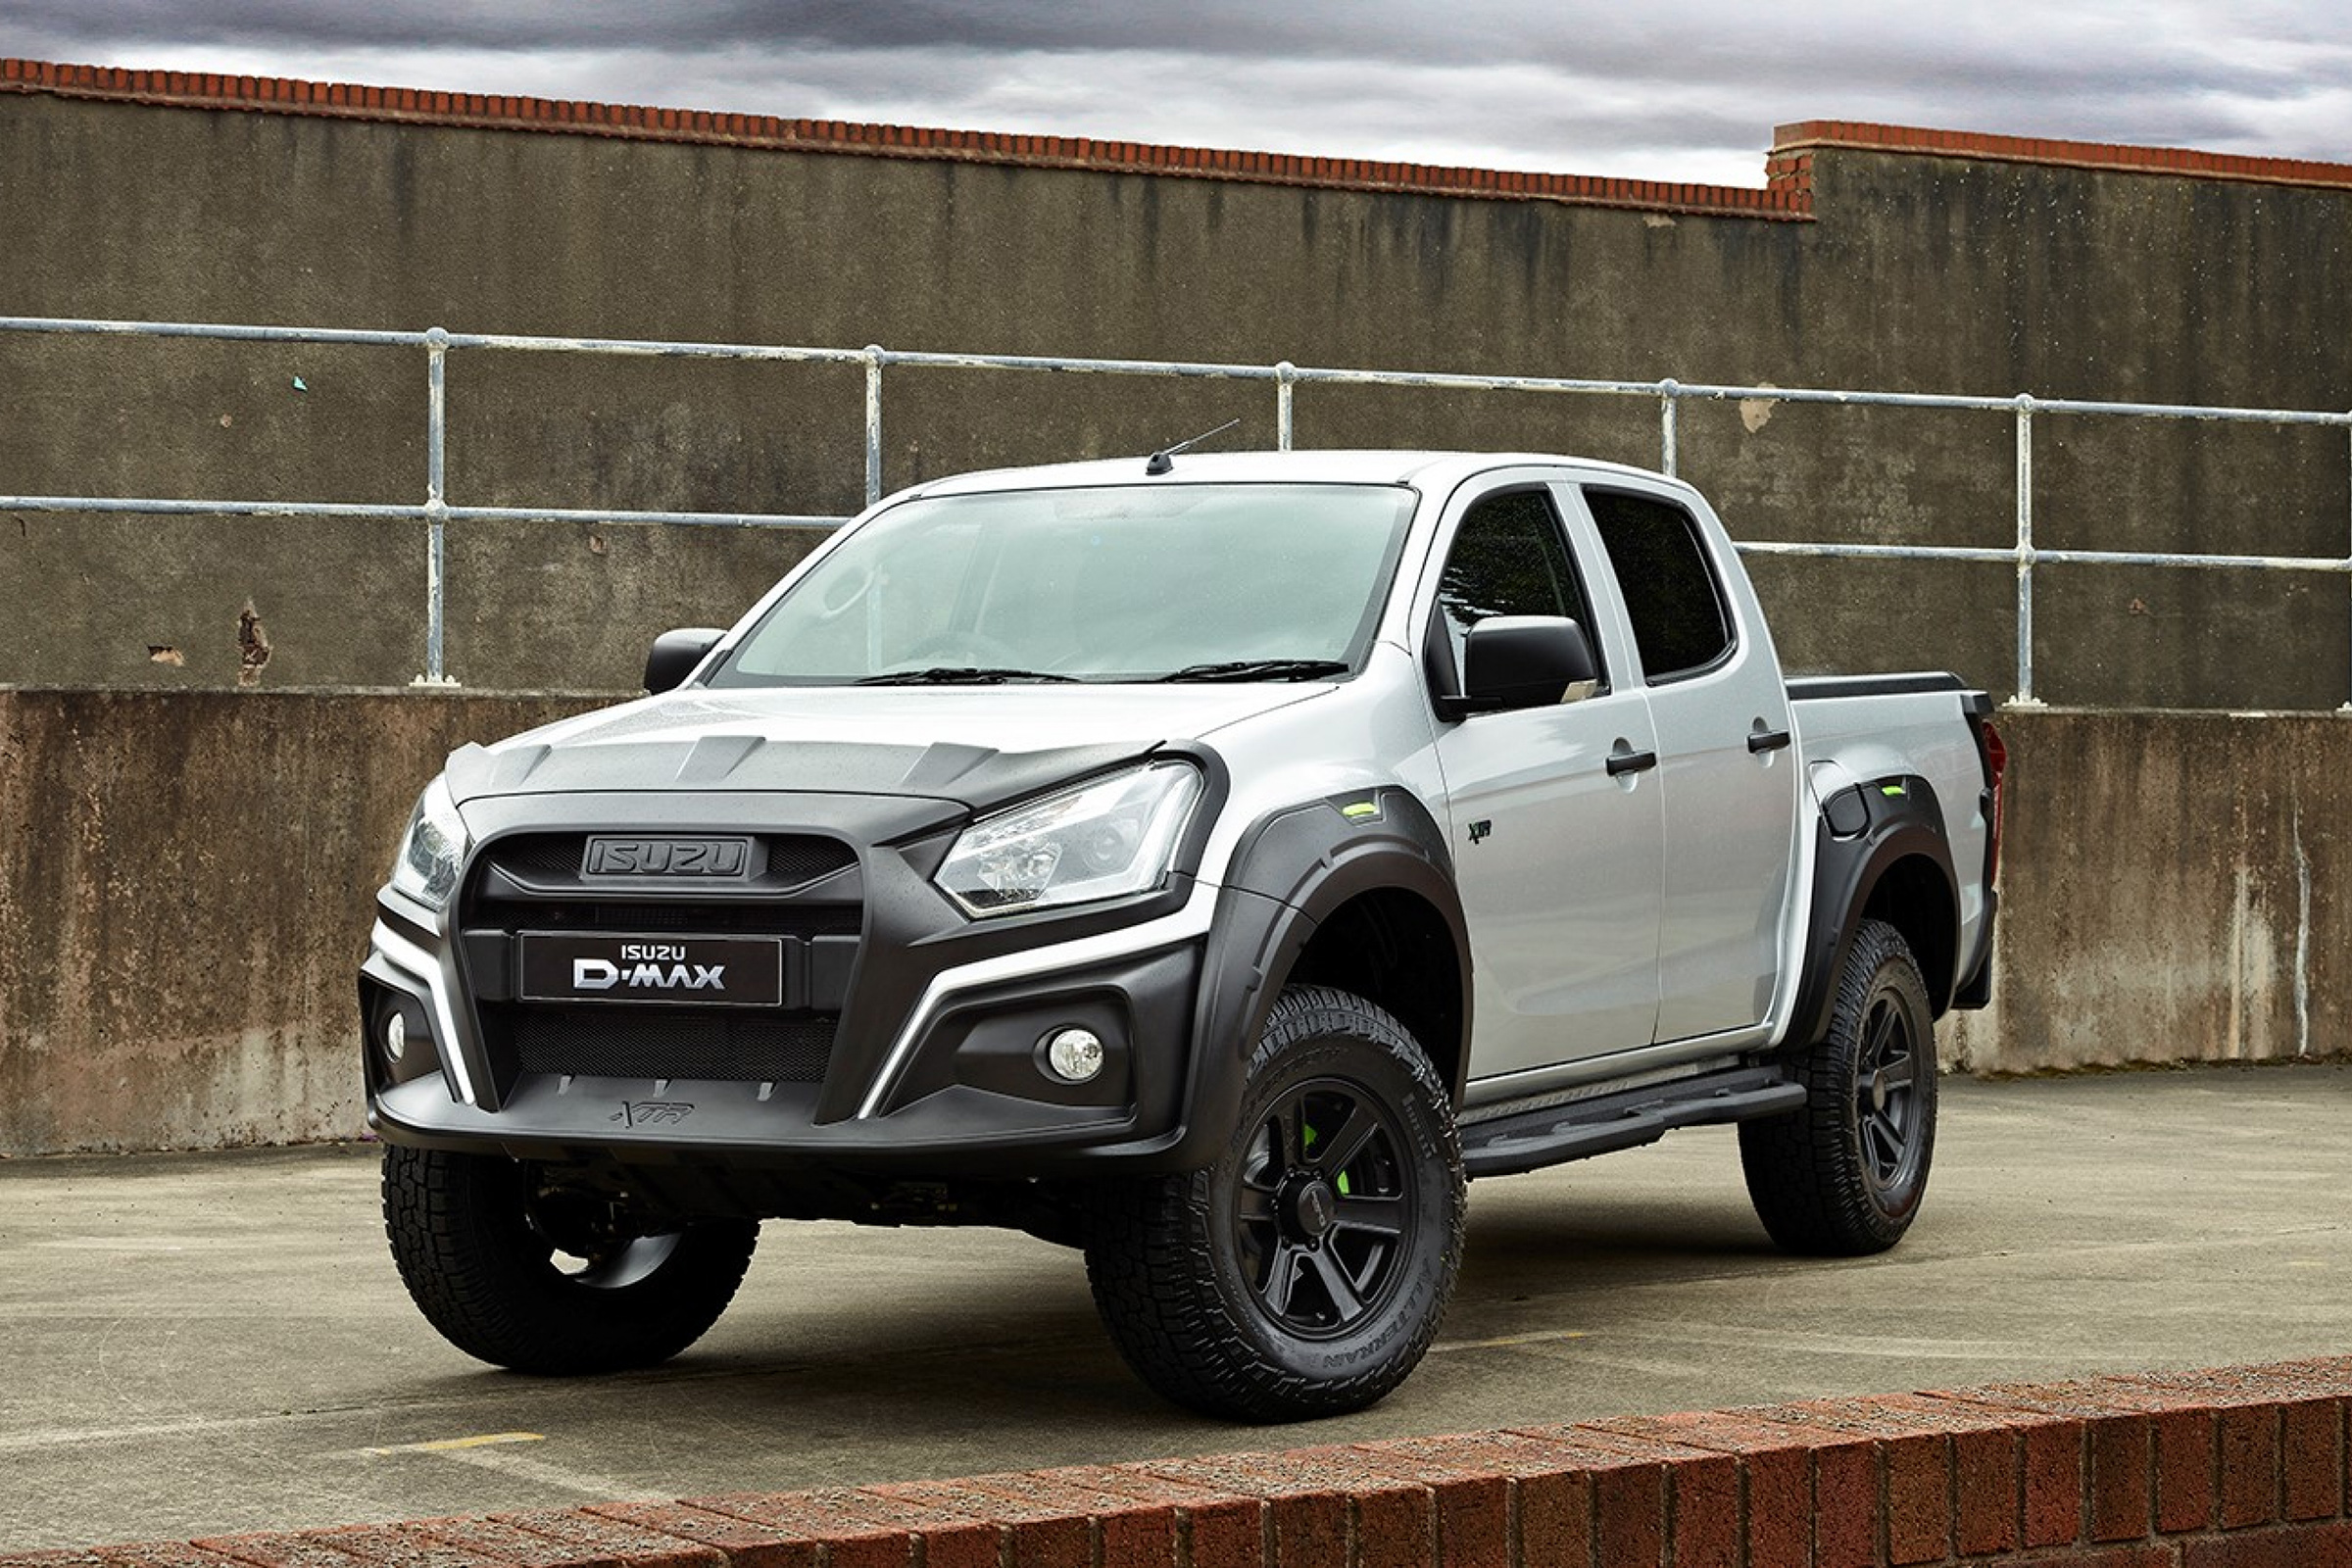 Two new Isuzu DMax pickup models revealed pictures Carbuyer